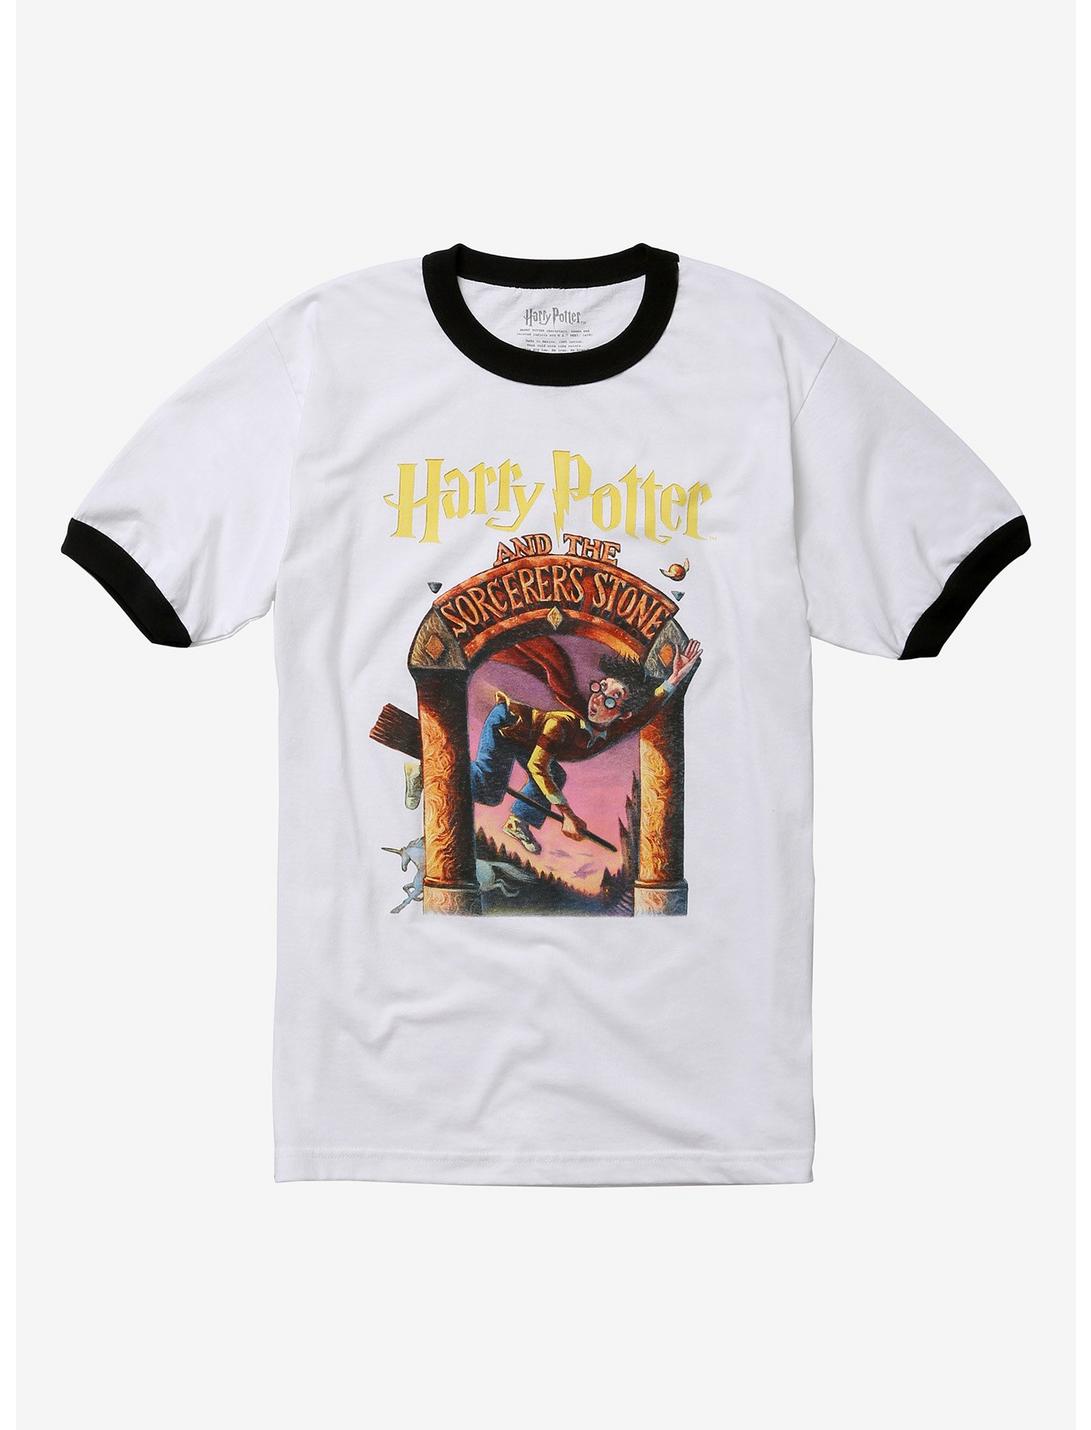 Harry Potter And The Sorcerer's Stone Book Cover T-Shirt, WHITE, hi-res